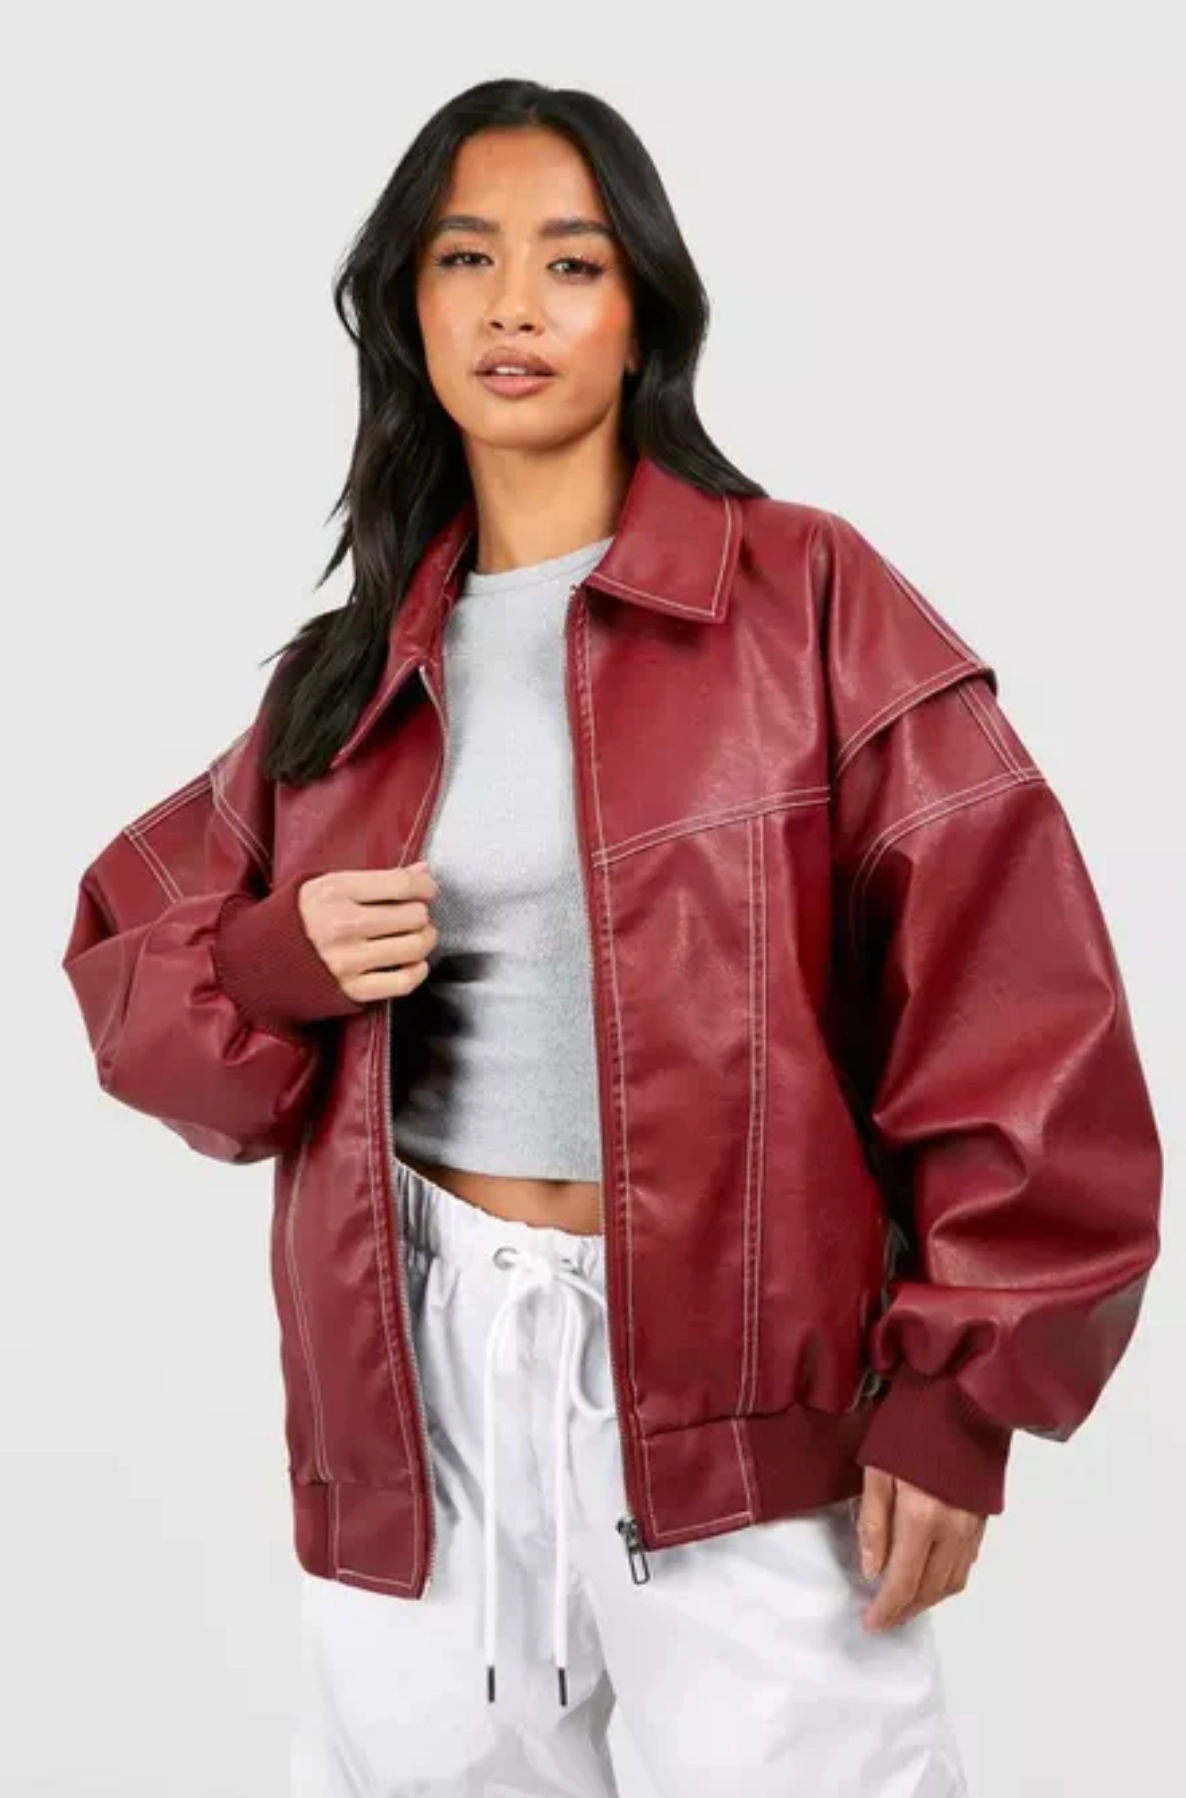 MARIA CONTRAST STITCH LEATHER JACKET - CHERRY RED